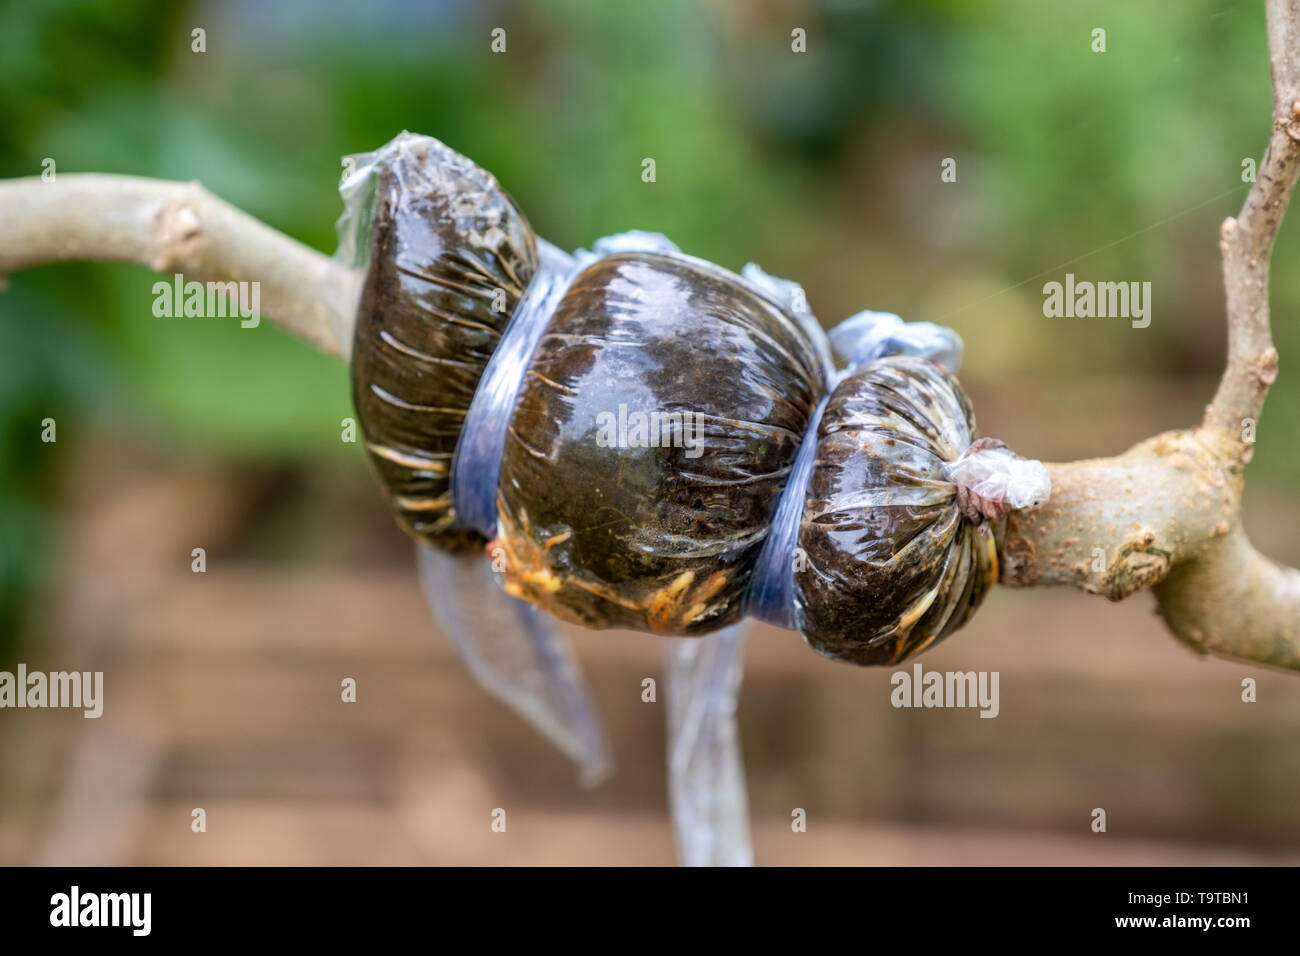 Grafting plant with plastic bag covered on branch in garden Stock Photo -  Alamy